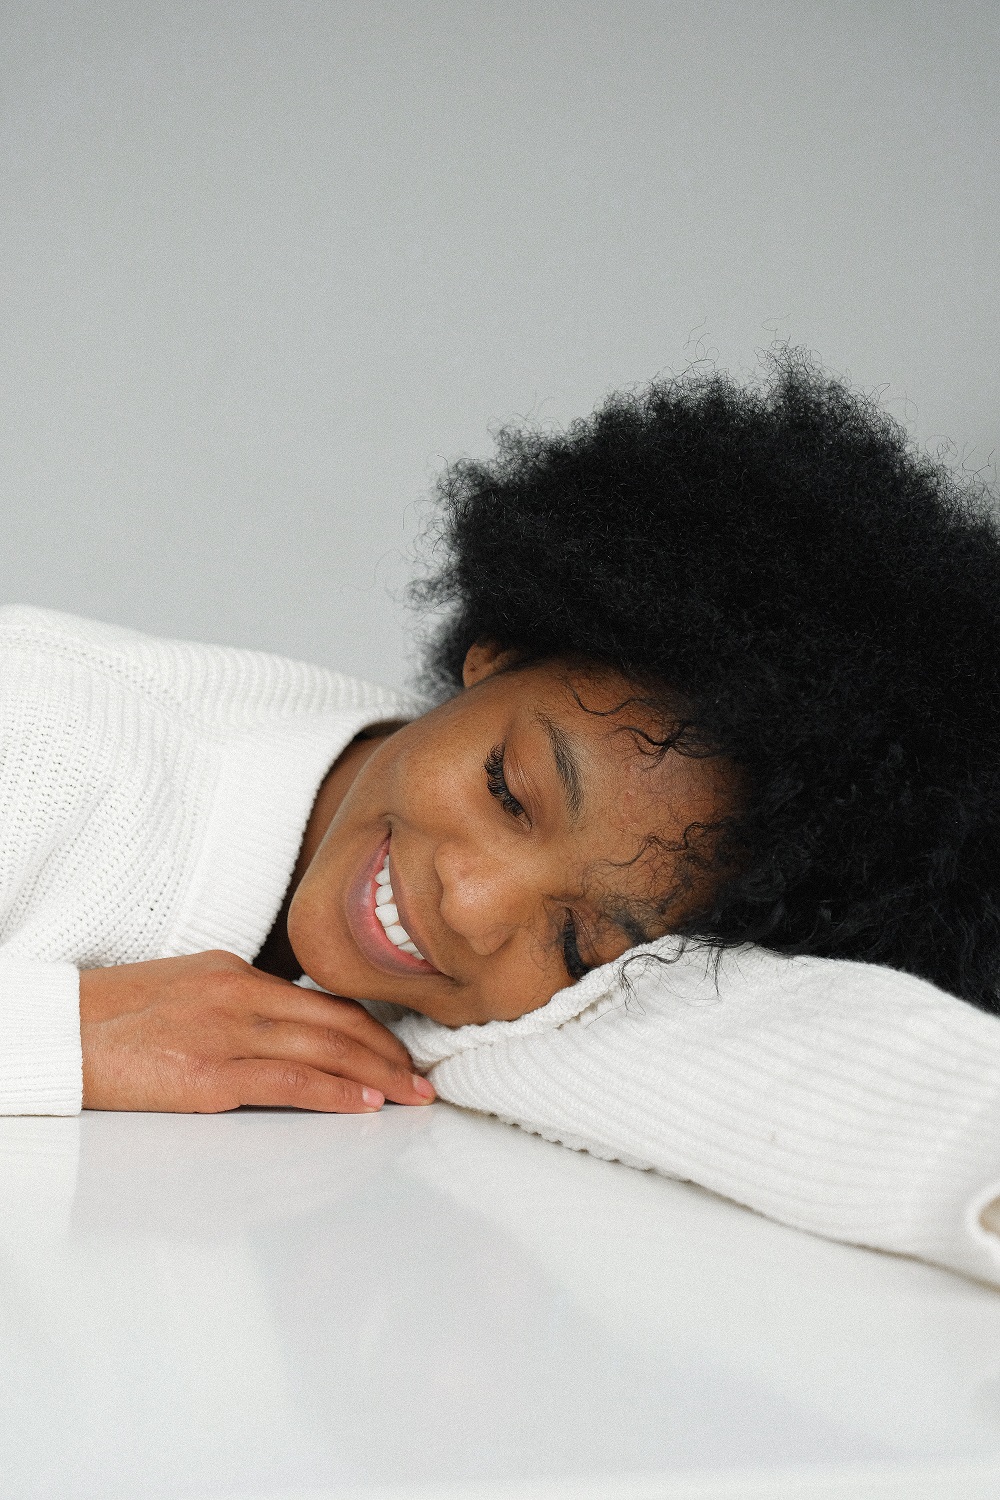 Lady with natural hair sleeping on white bed while smiling